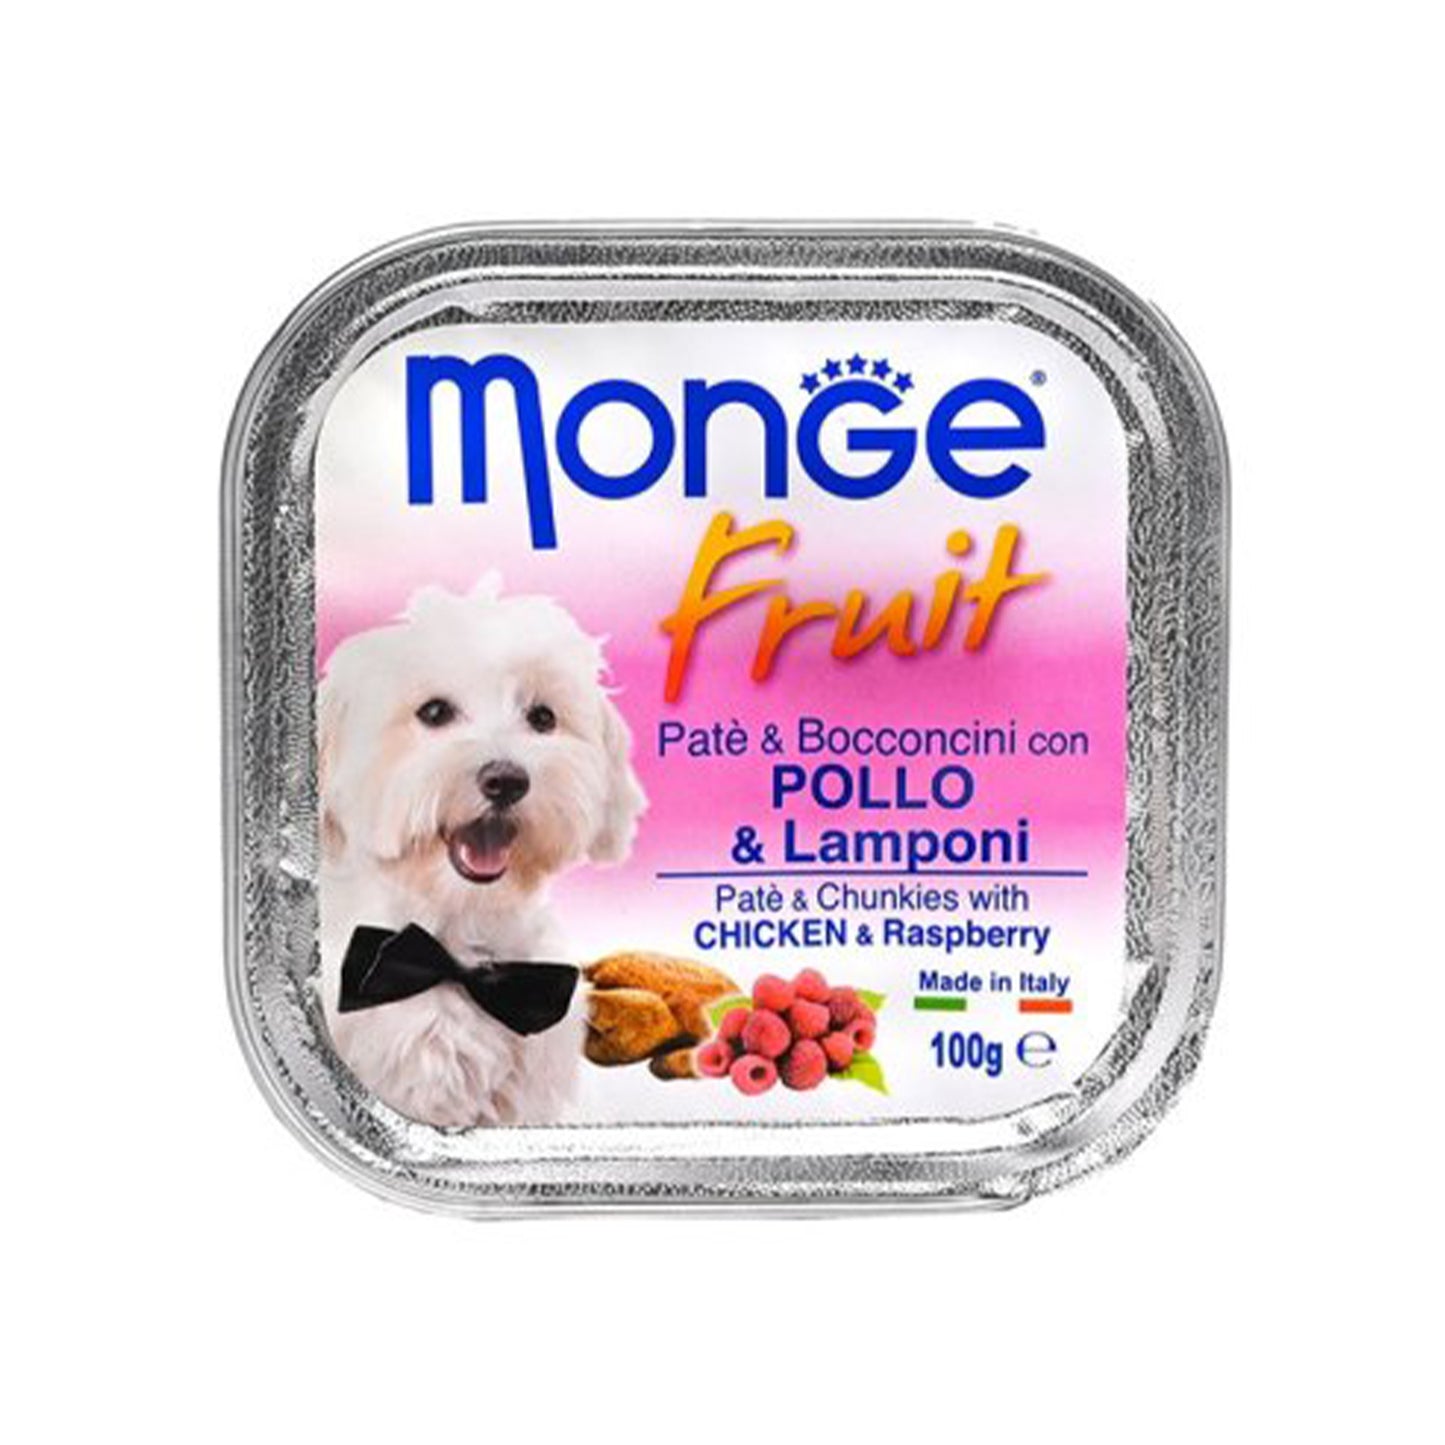 All4pets - Fruit Monge Fruit Pate & Chunkies with Chicken & Raspberry For Dogs